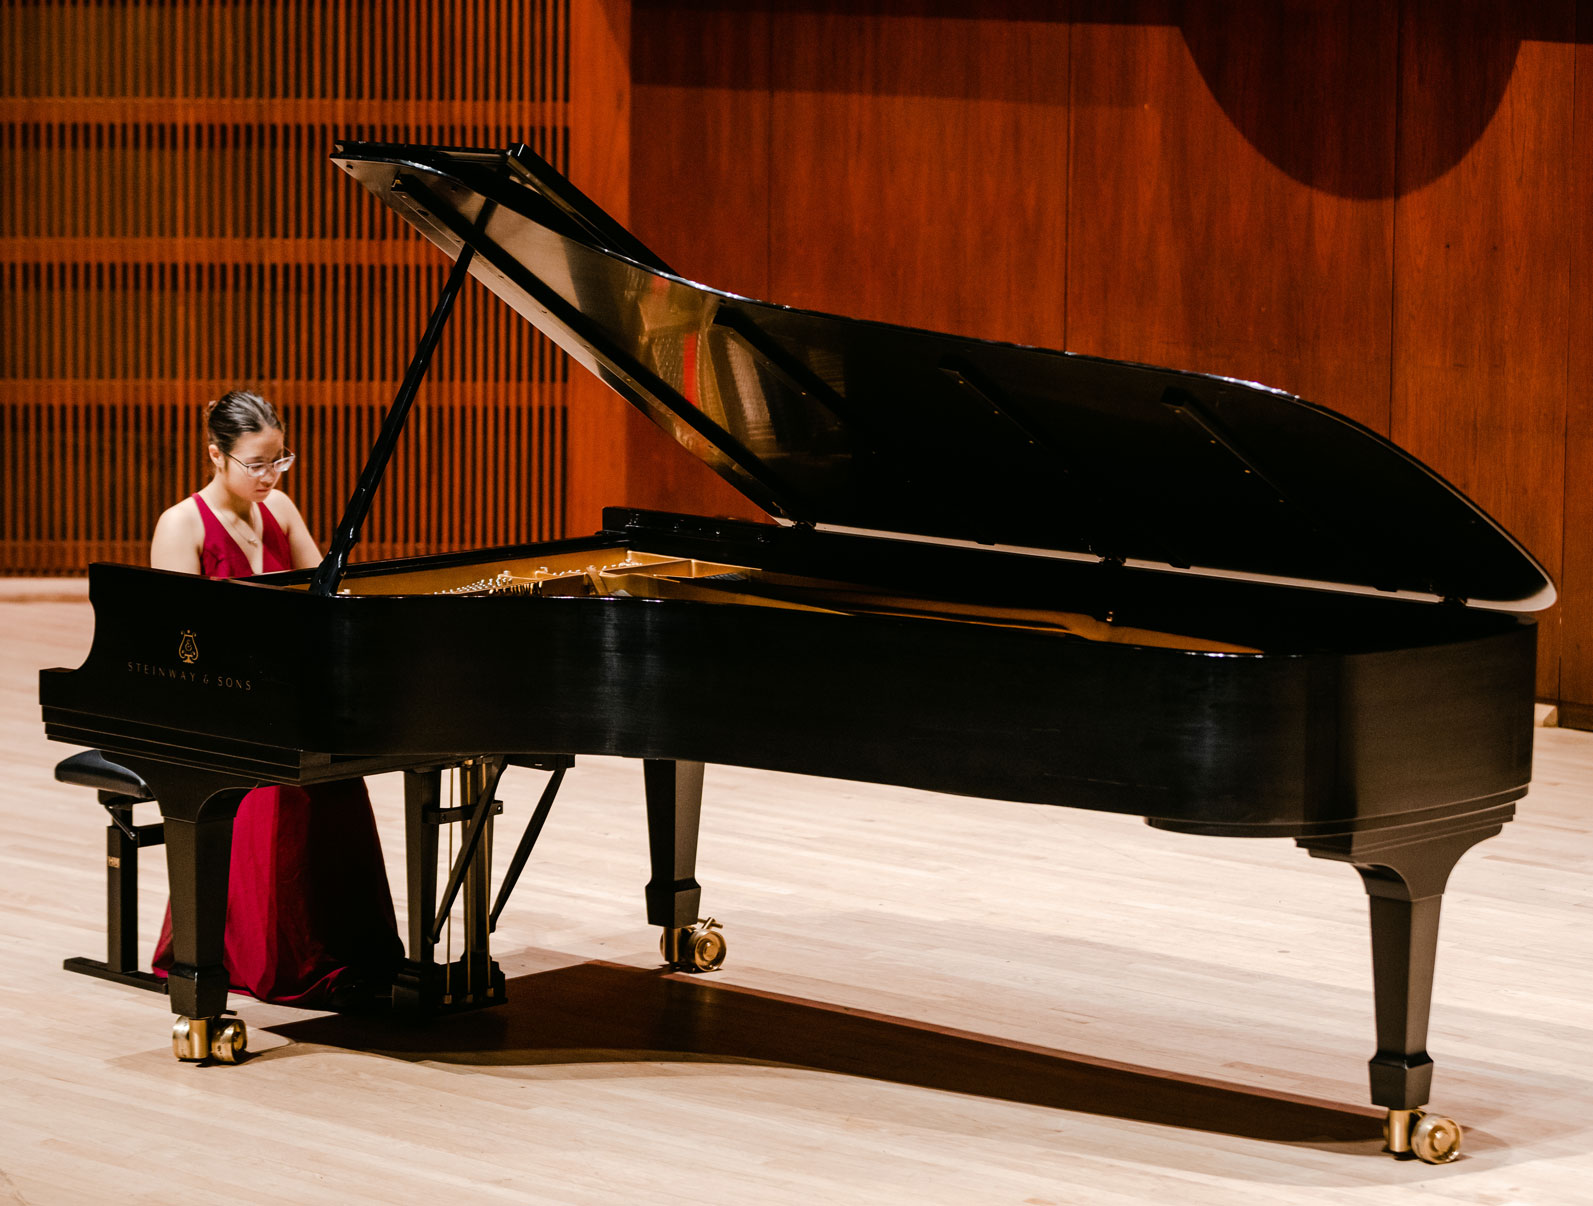 Piano and math double major Yumi Hastings performs a piano composition piece on stage.